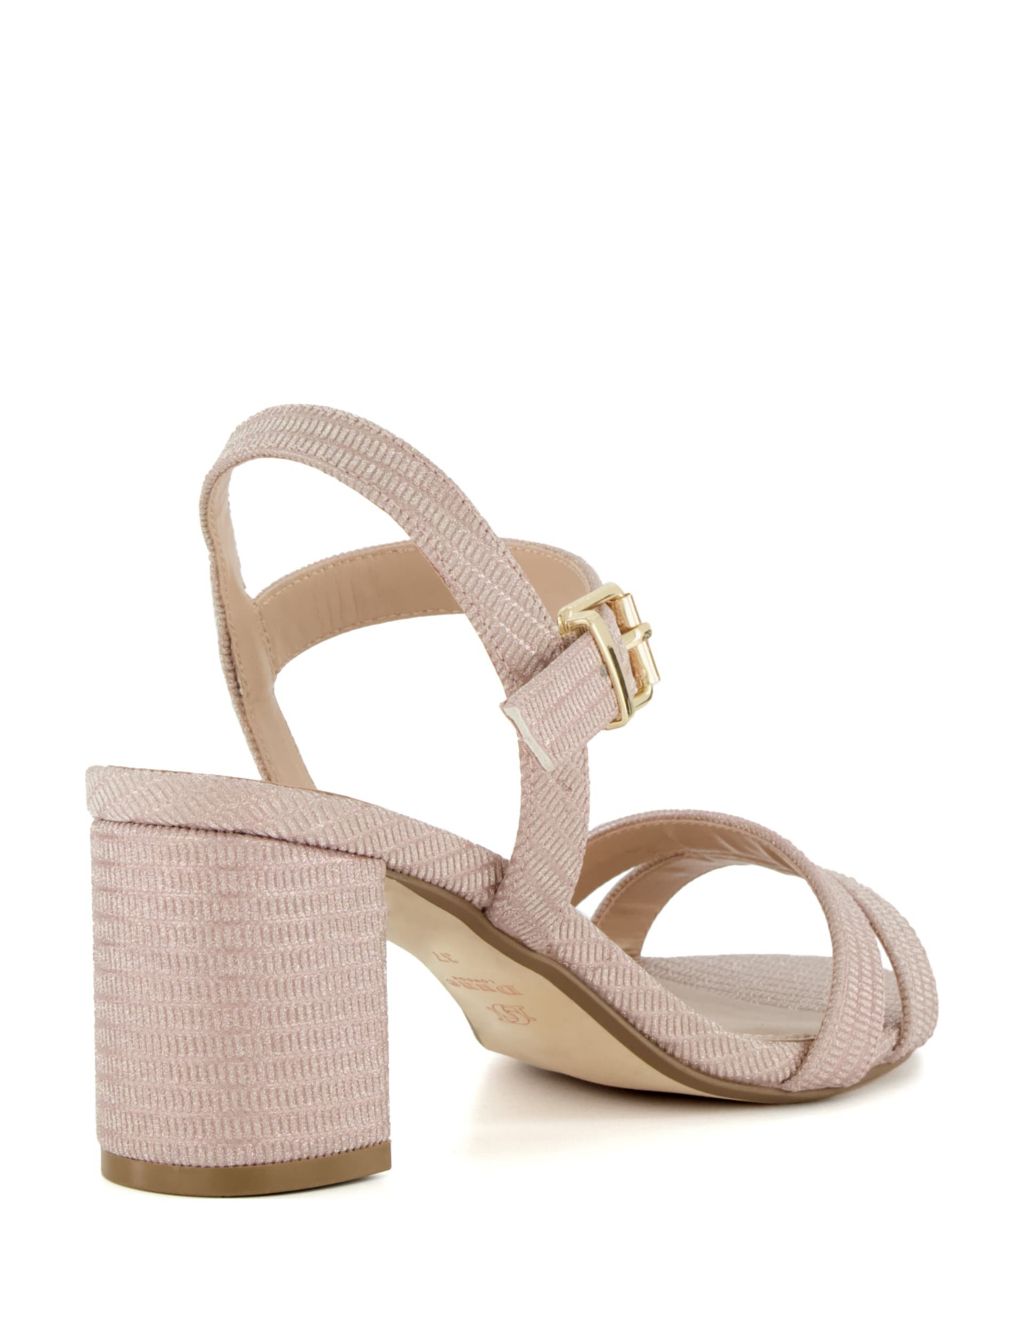 Wide Fit Leather Ankle Strap Sandals image 3